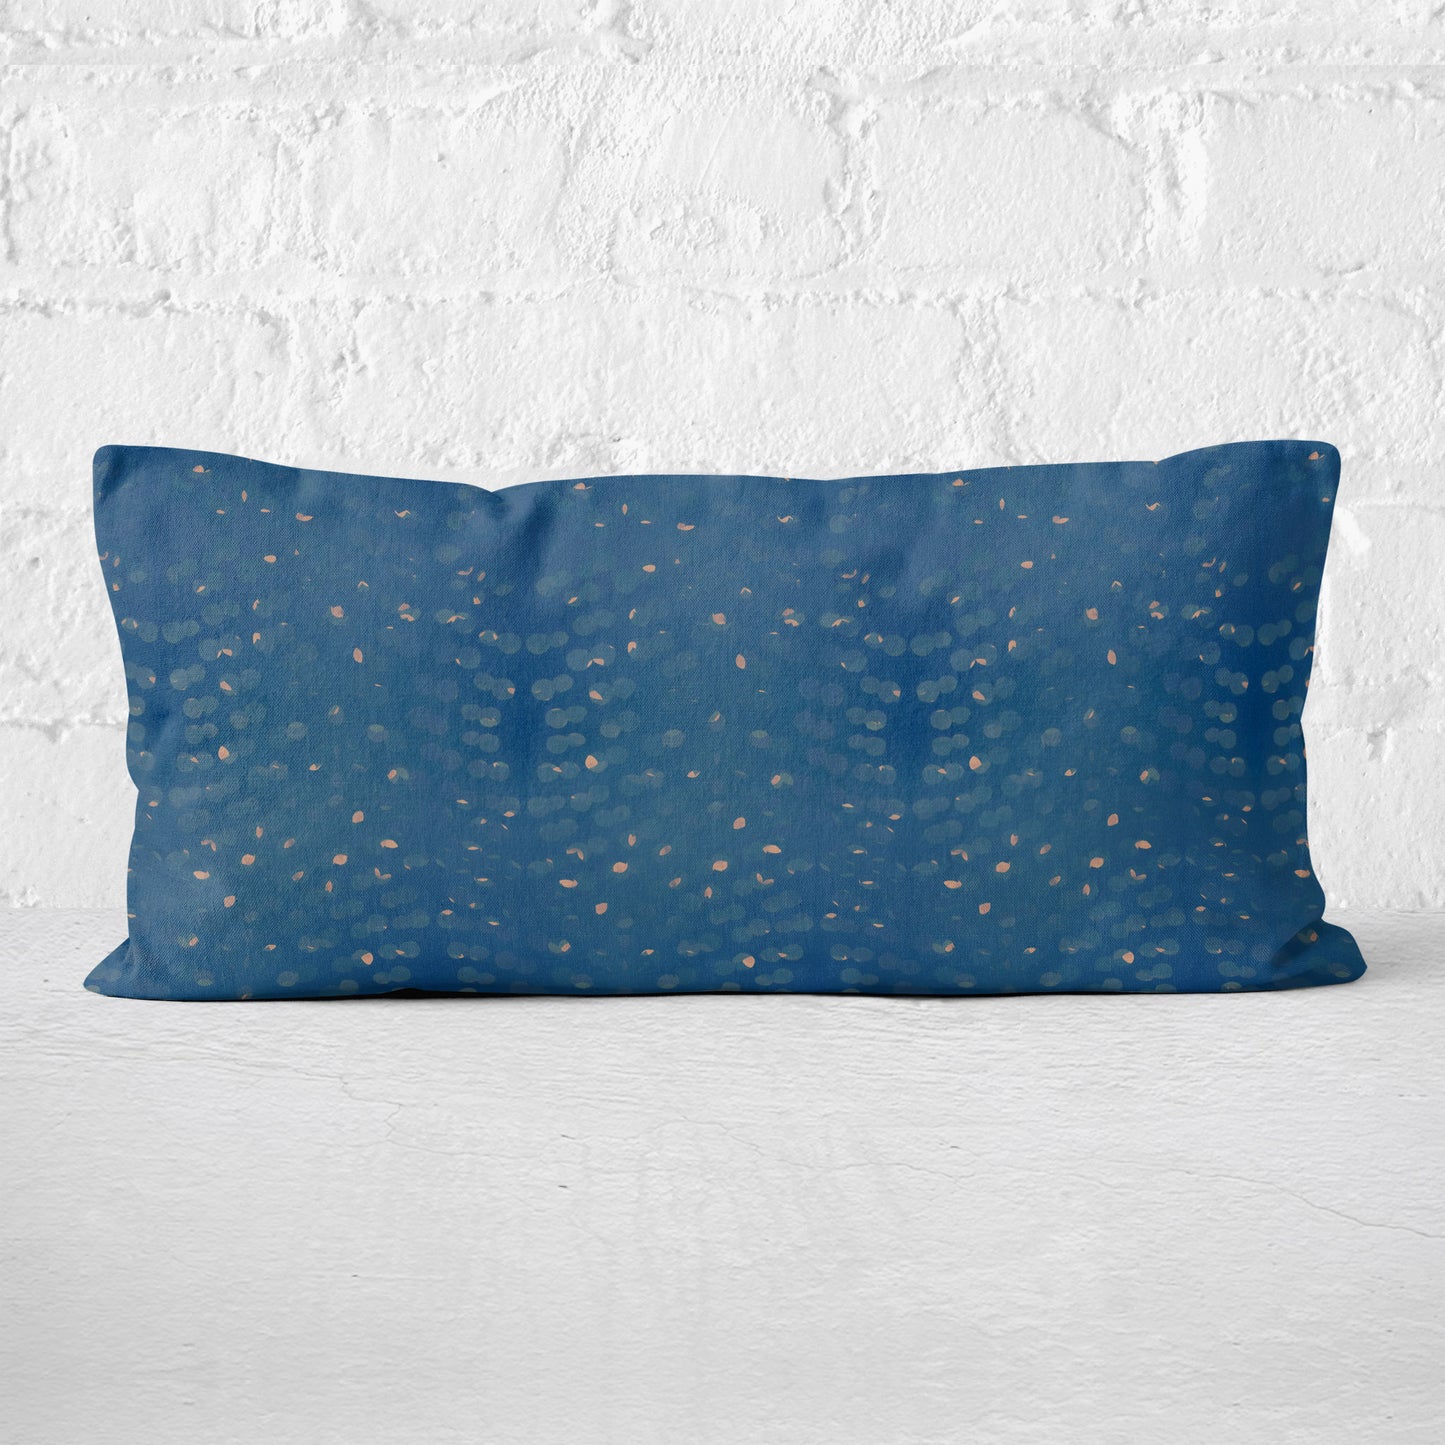 Rectangular lumbar pillow with hand-painted blue and beige pattern against a white brick wall.